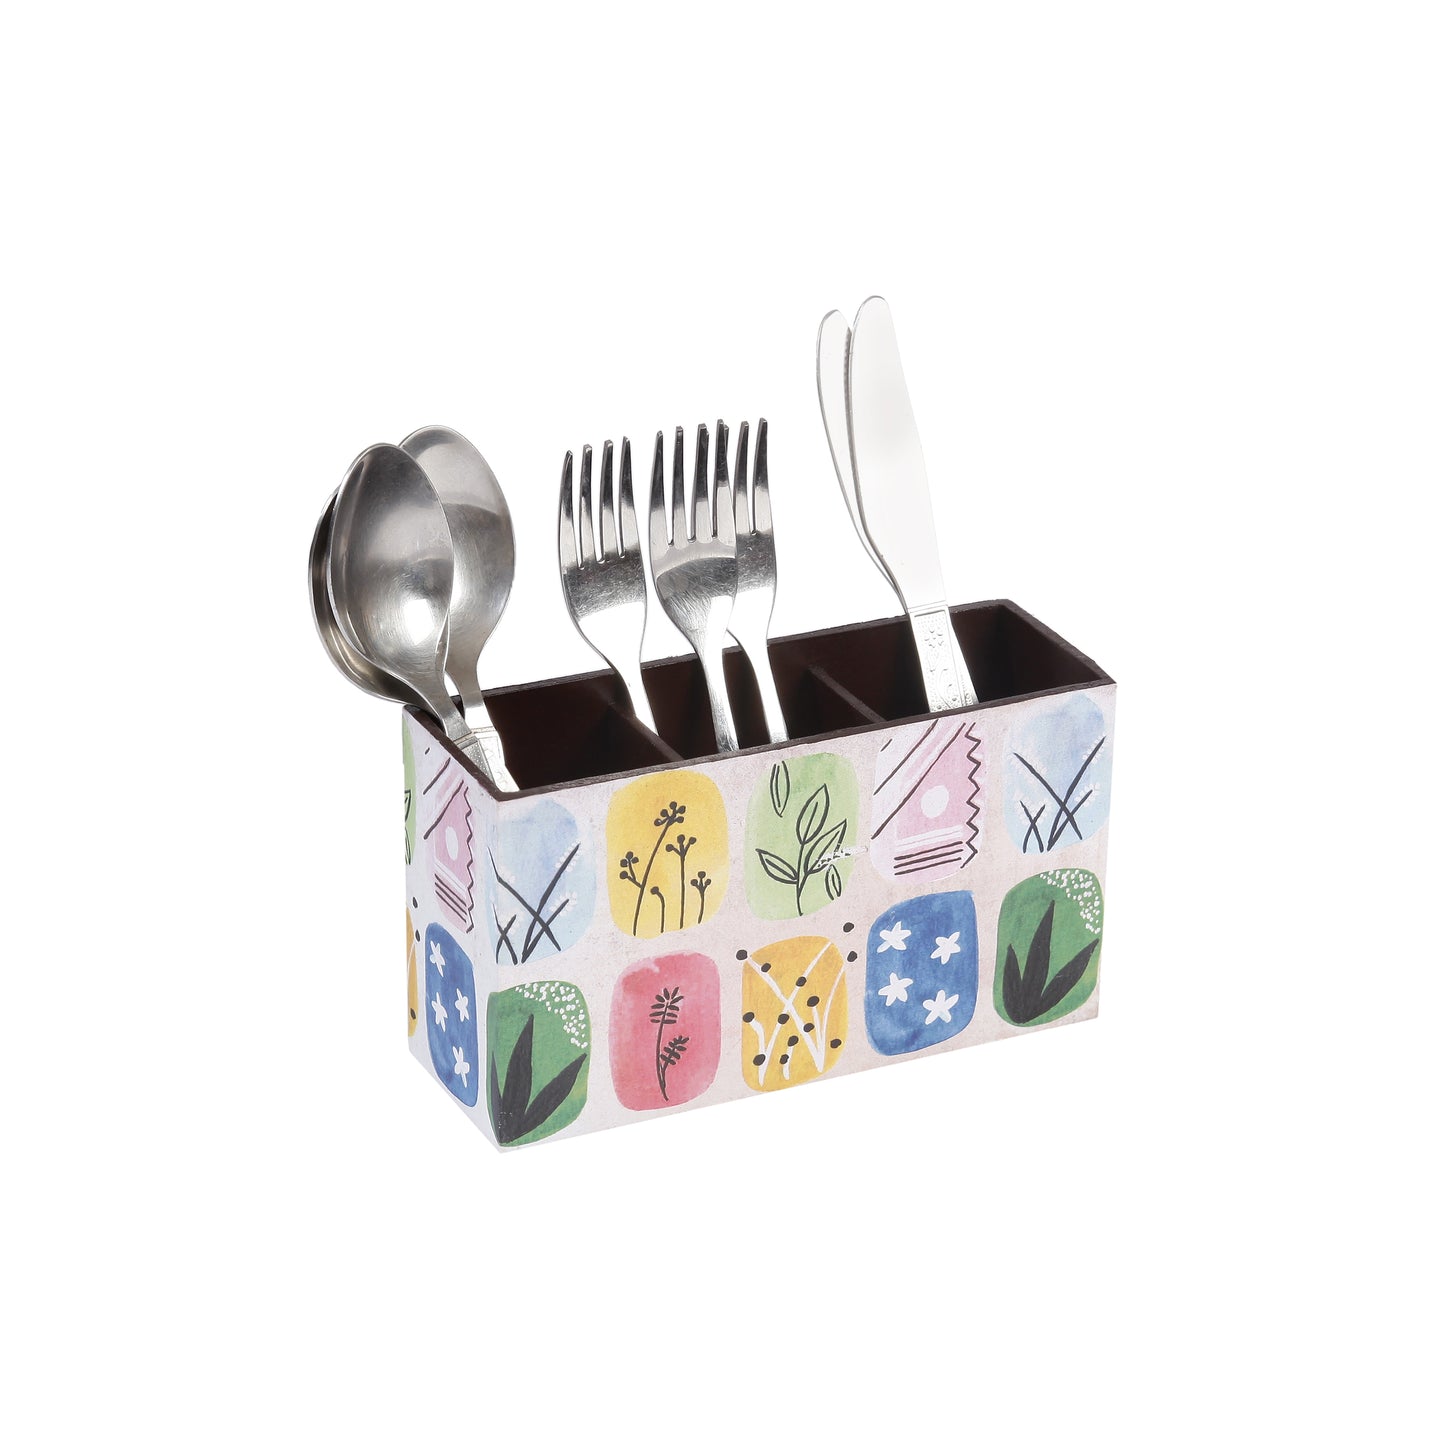 A Tiny Mistake Abstract Blocks Wooden Cutlery Holder, 18 x 10 x 6.5 cm